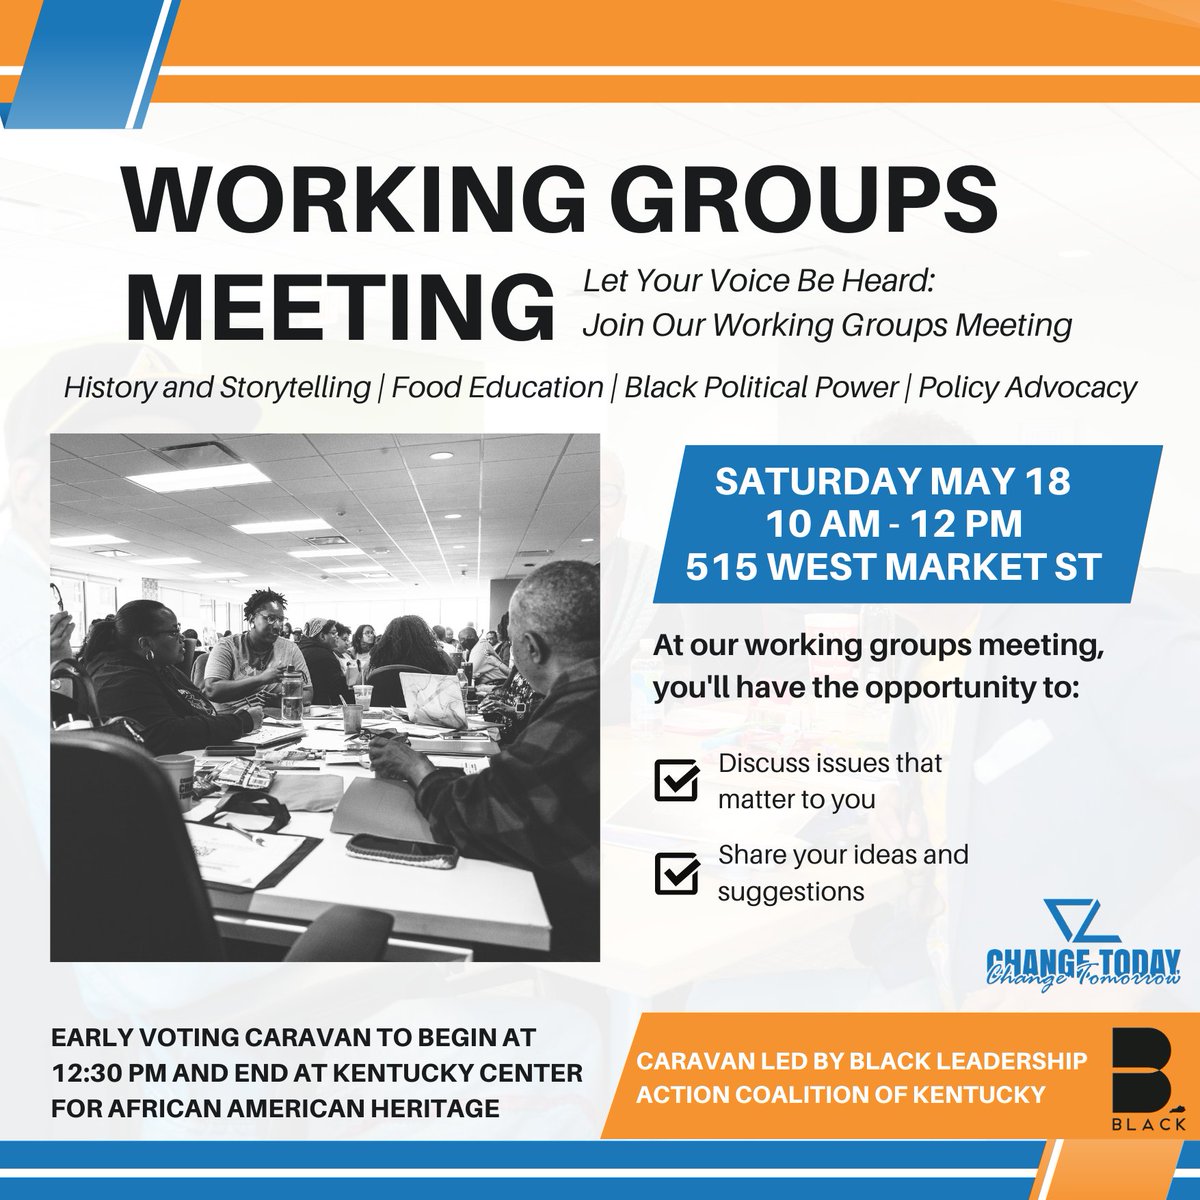 Join us at our Working Groups Meeting on Sat, May 18th from 10AM-12PM at 515 West Market St. Let's create positive change together in our #CommUNITY! Don't miss out!